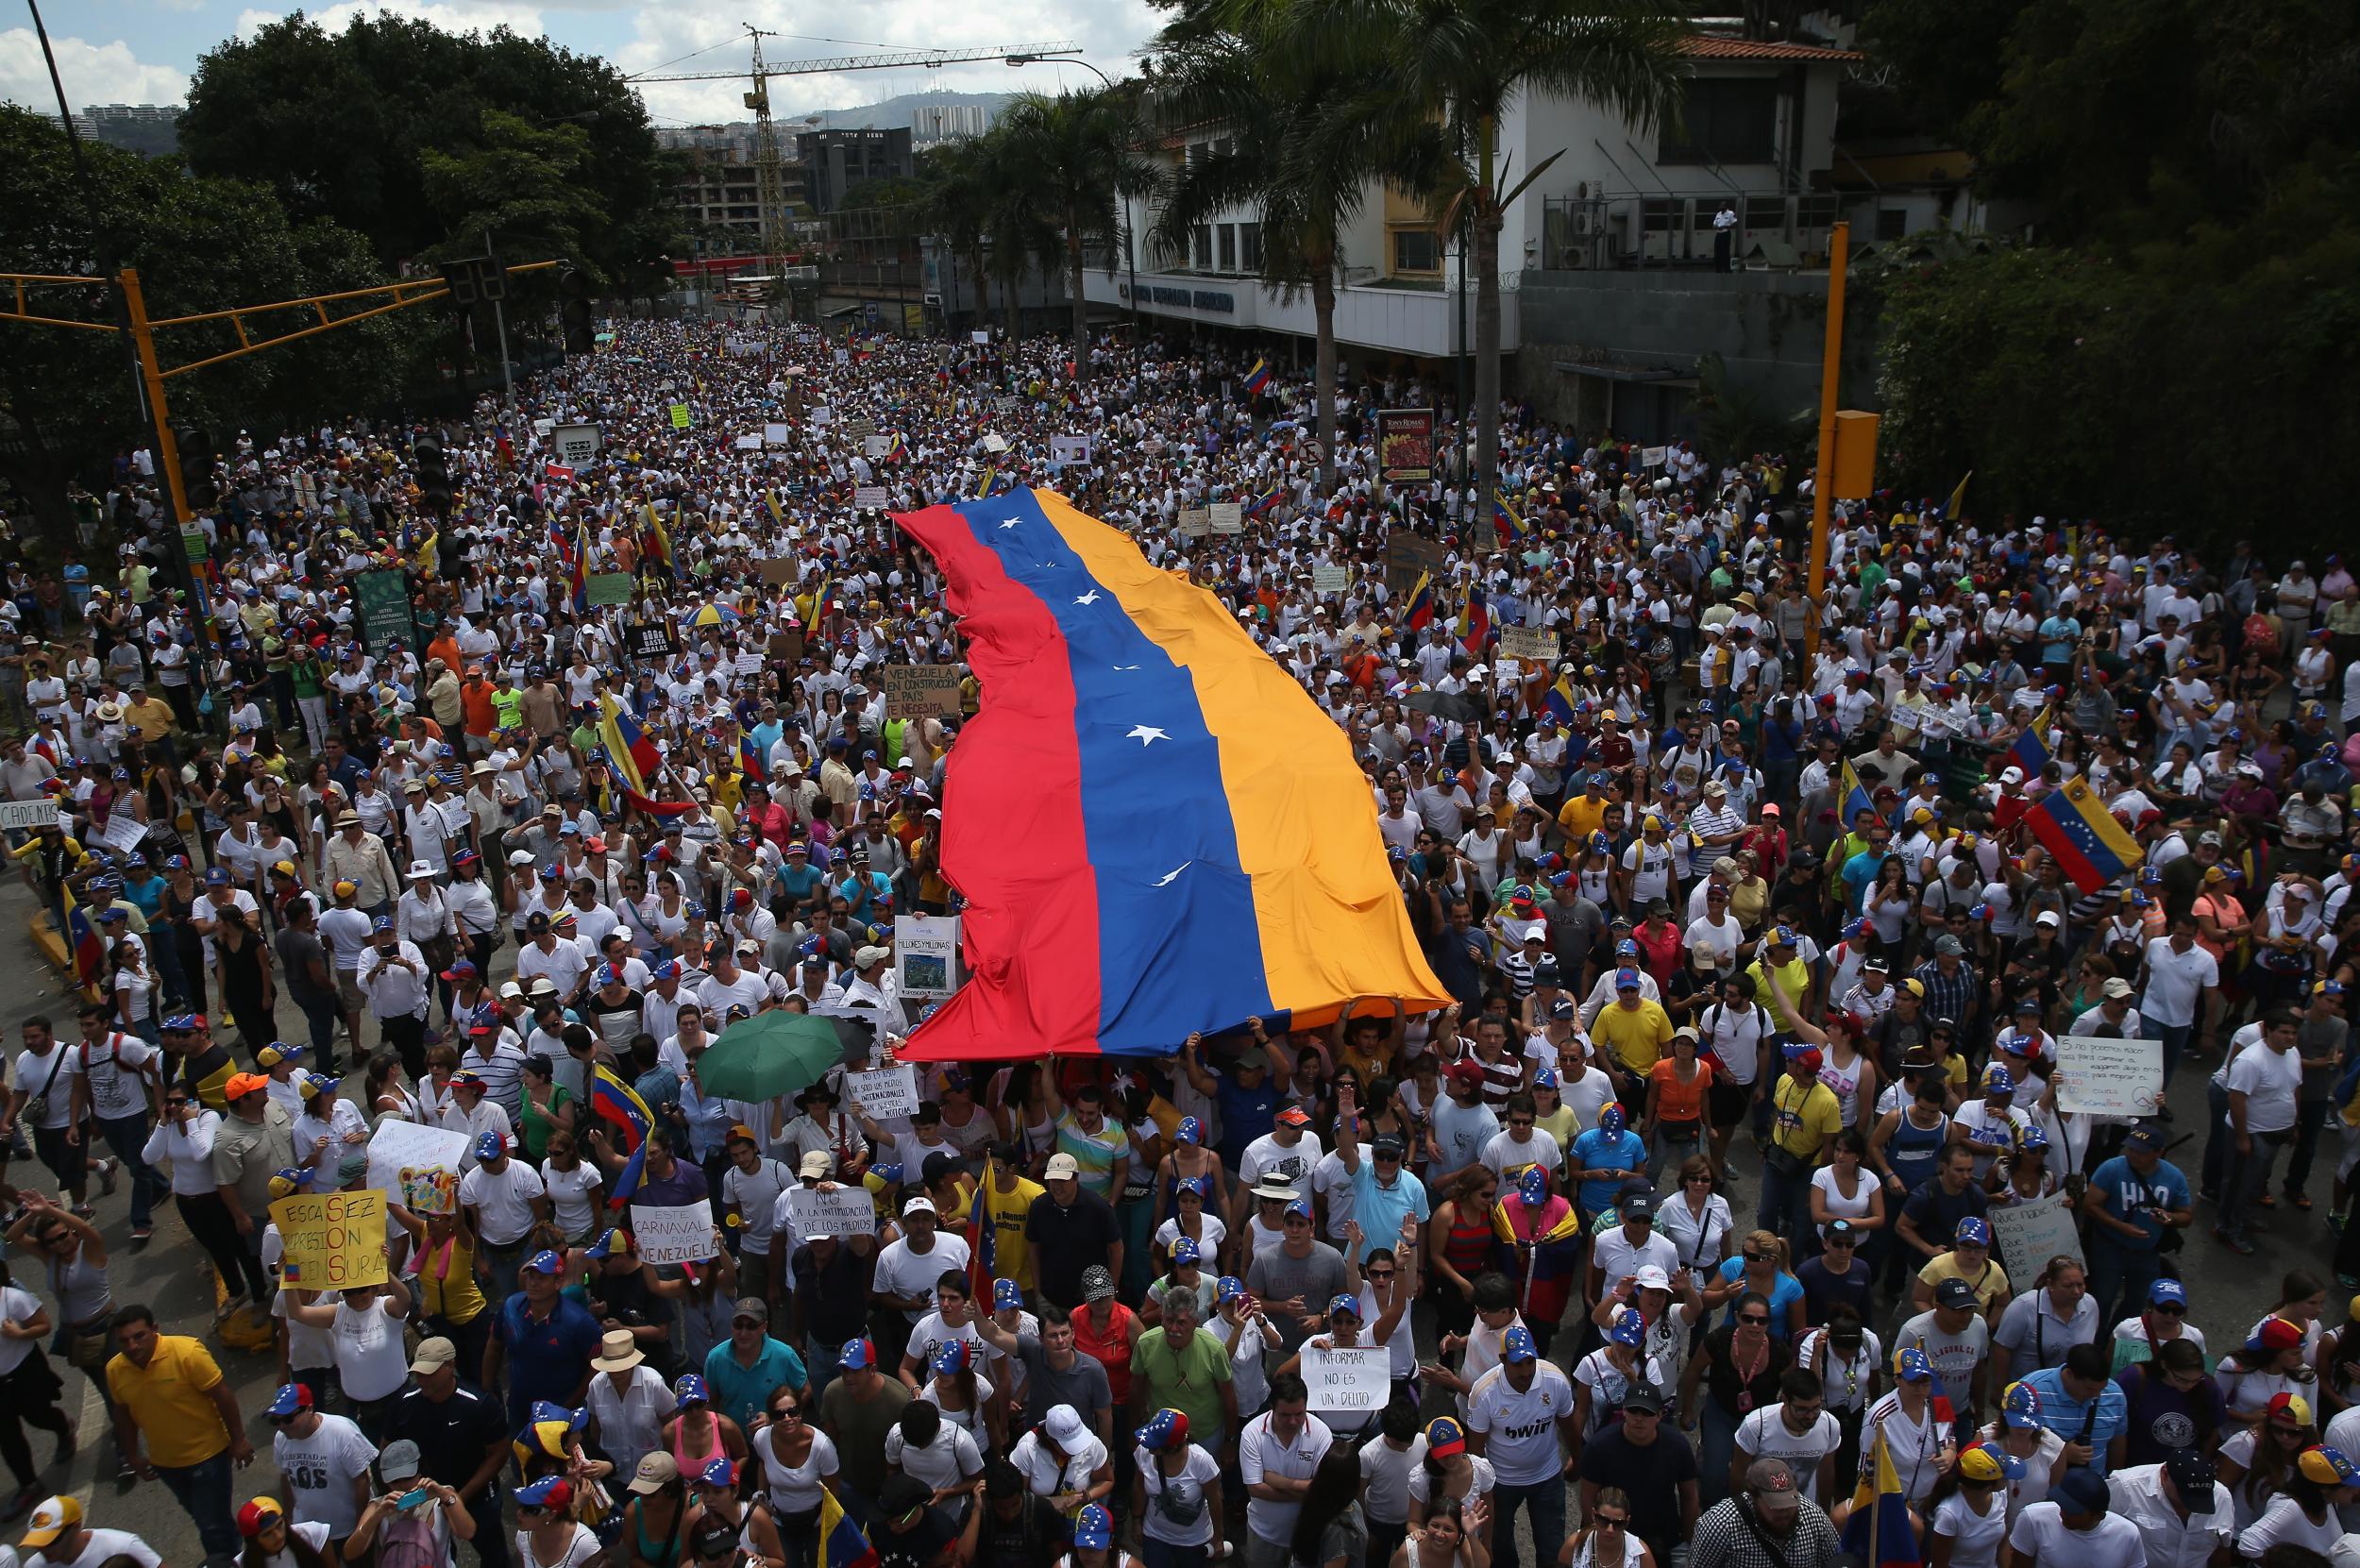 Carrying a giant Venezuelan flag, thousands of anti-government protesters march during a mass demonstration